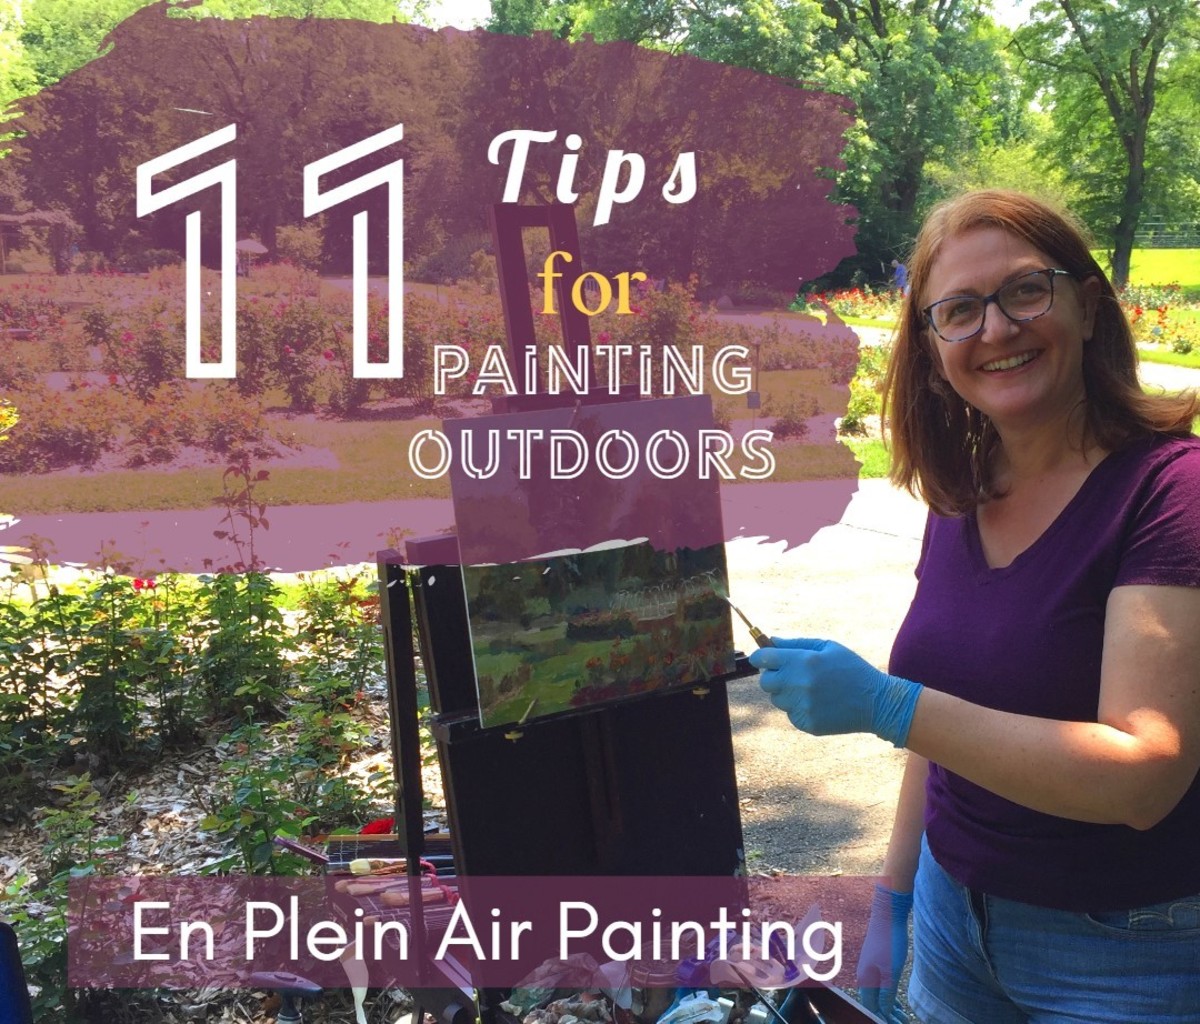 If you are used to studio painting, the first few paintings you do outdoors are going to be very challenging. These tips can help you make outdoor painting a little easier.